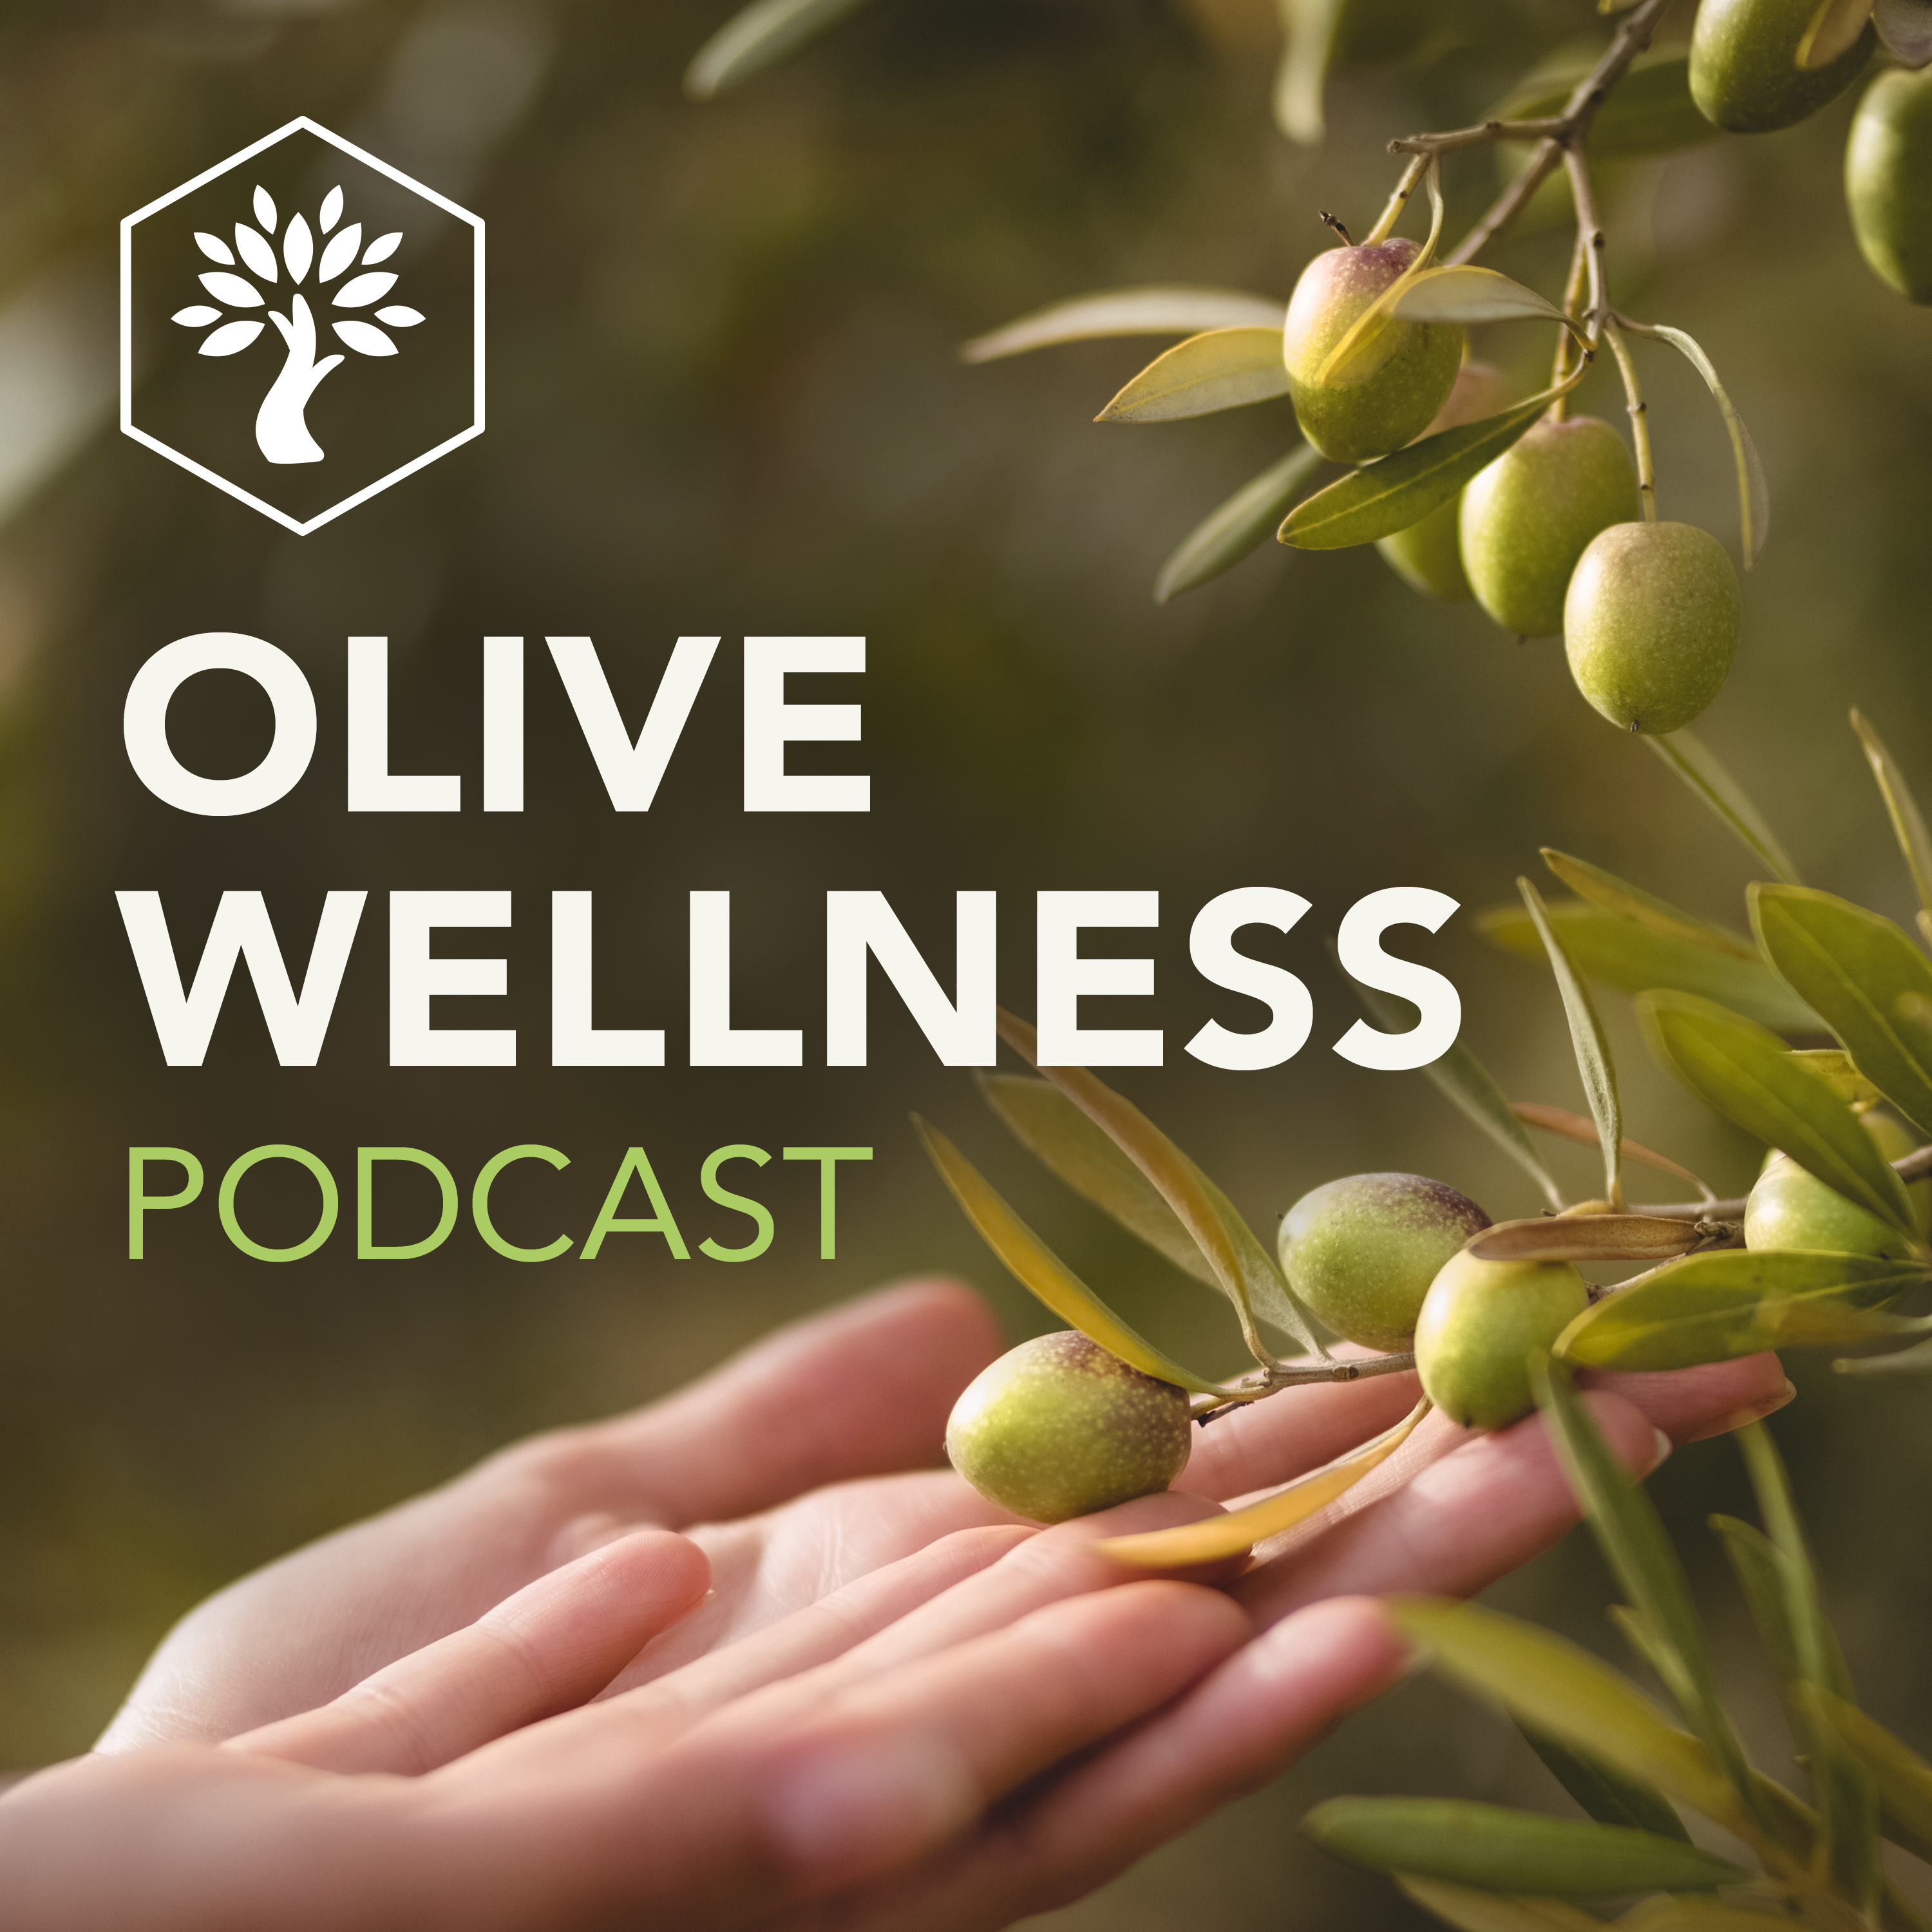 The "super plant" qualities of the olive tree